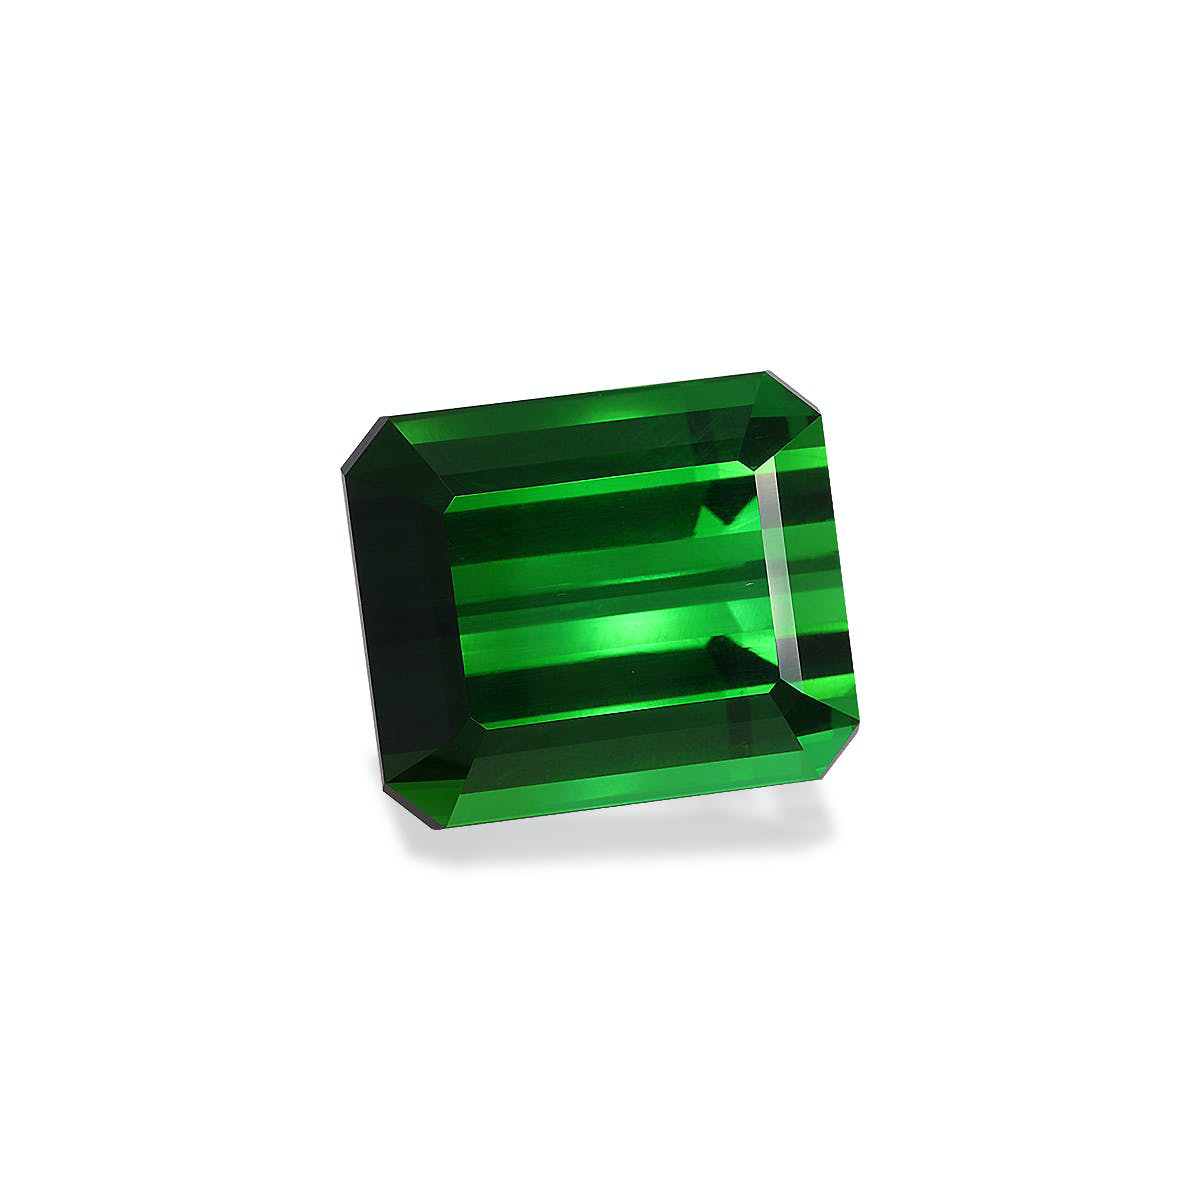 Picture of Vivid Green Tourmaline 79.36ct (TG0843)